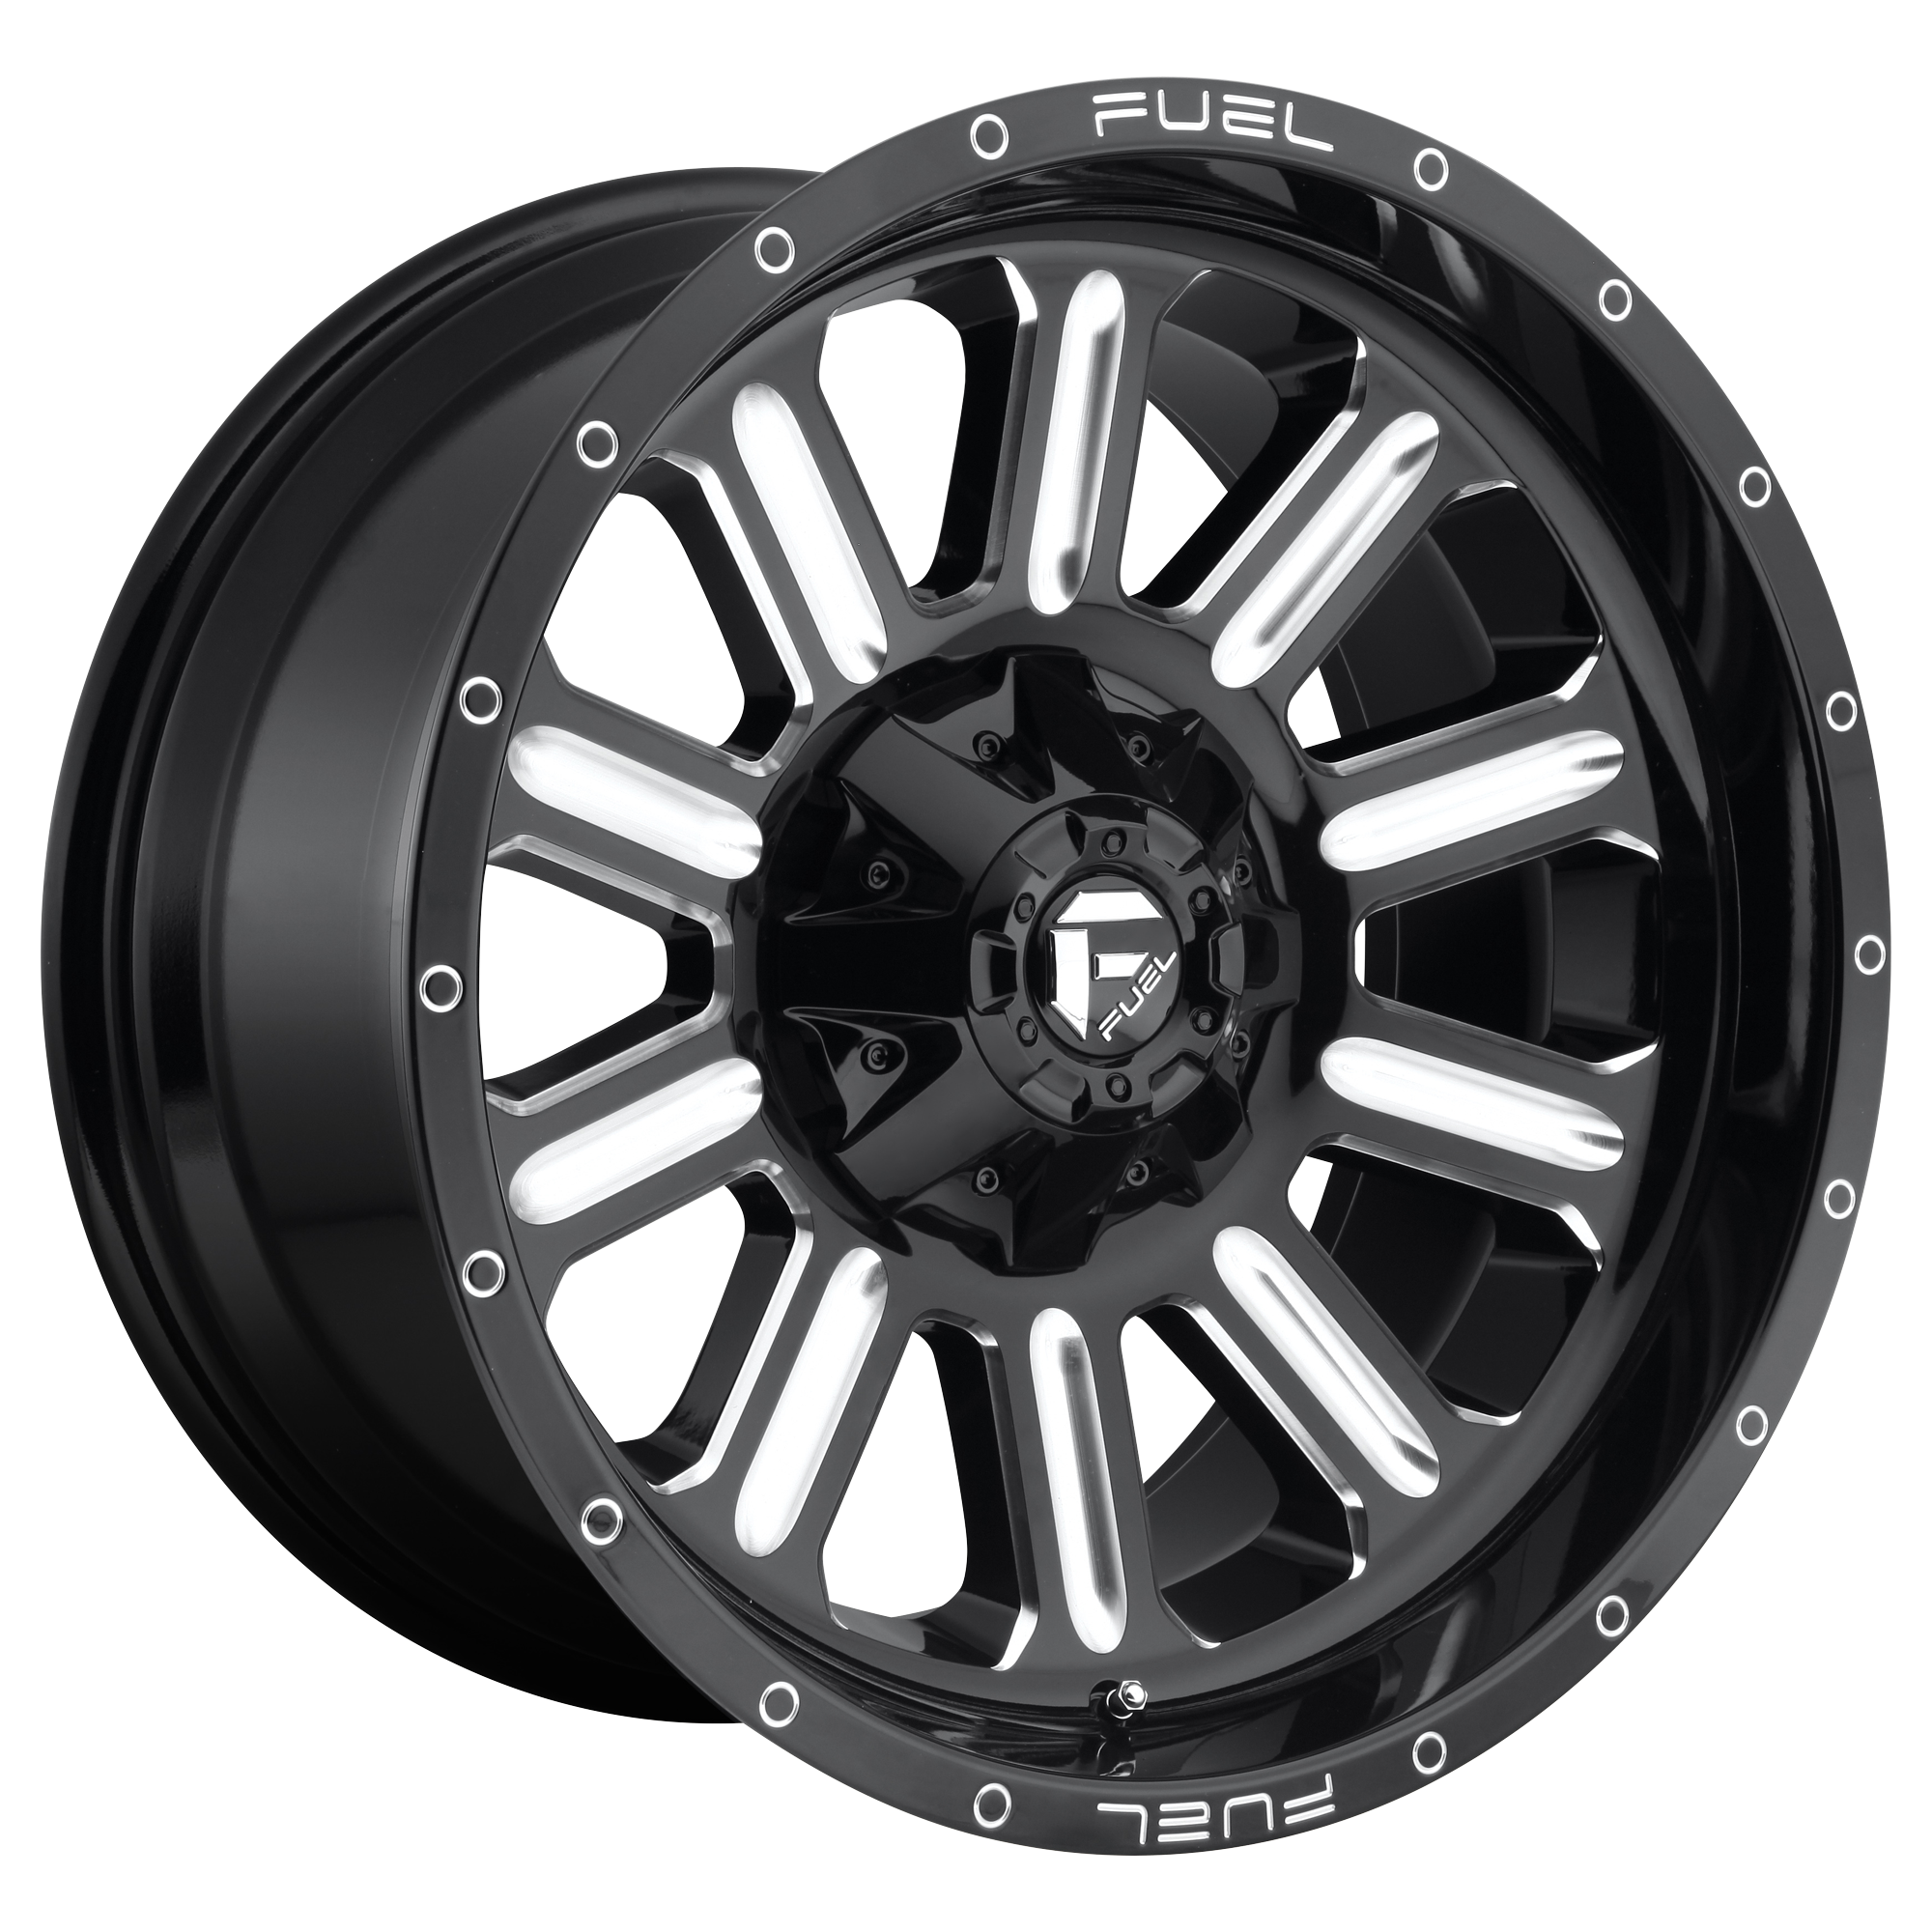 HARDLINE 17x9 5x114.30/5x127.00 GLOSS BLACK MILLED (1 mm) - Tires and Engine Performance